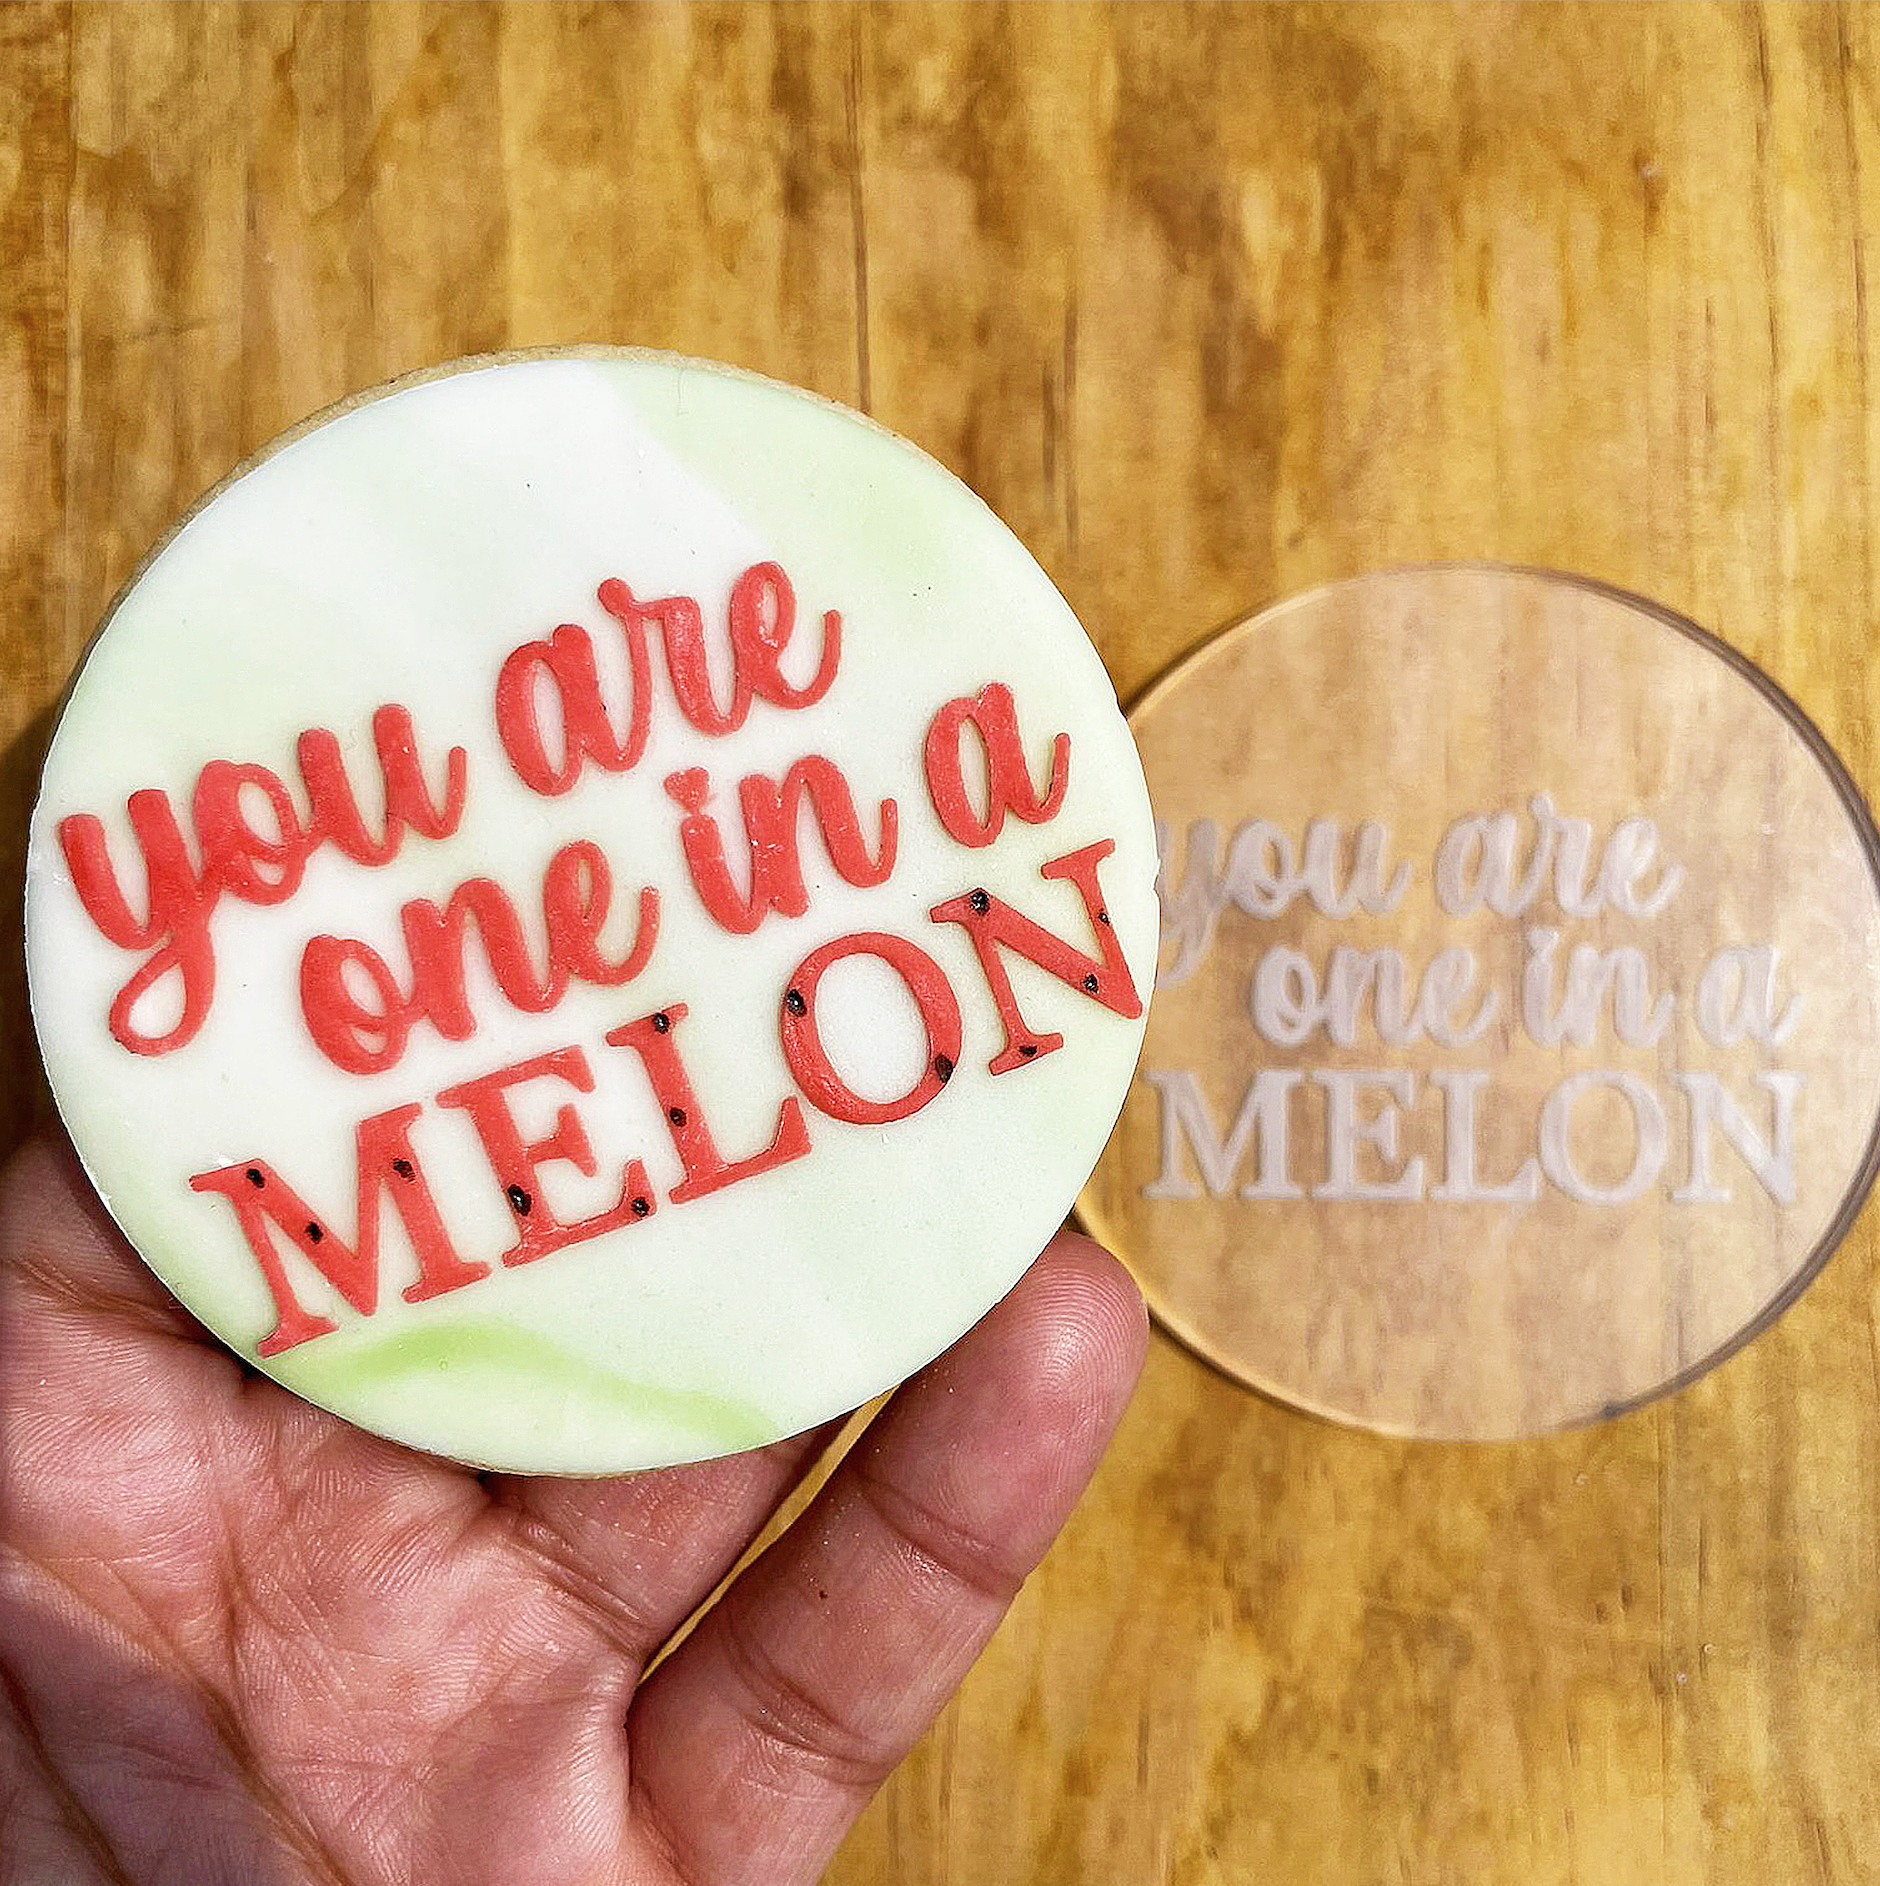 You are one in a Melon debossing MEG cookie cutters